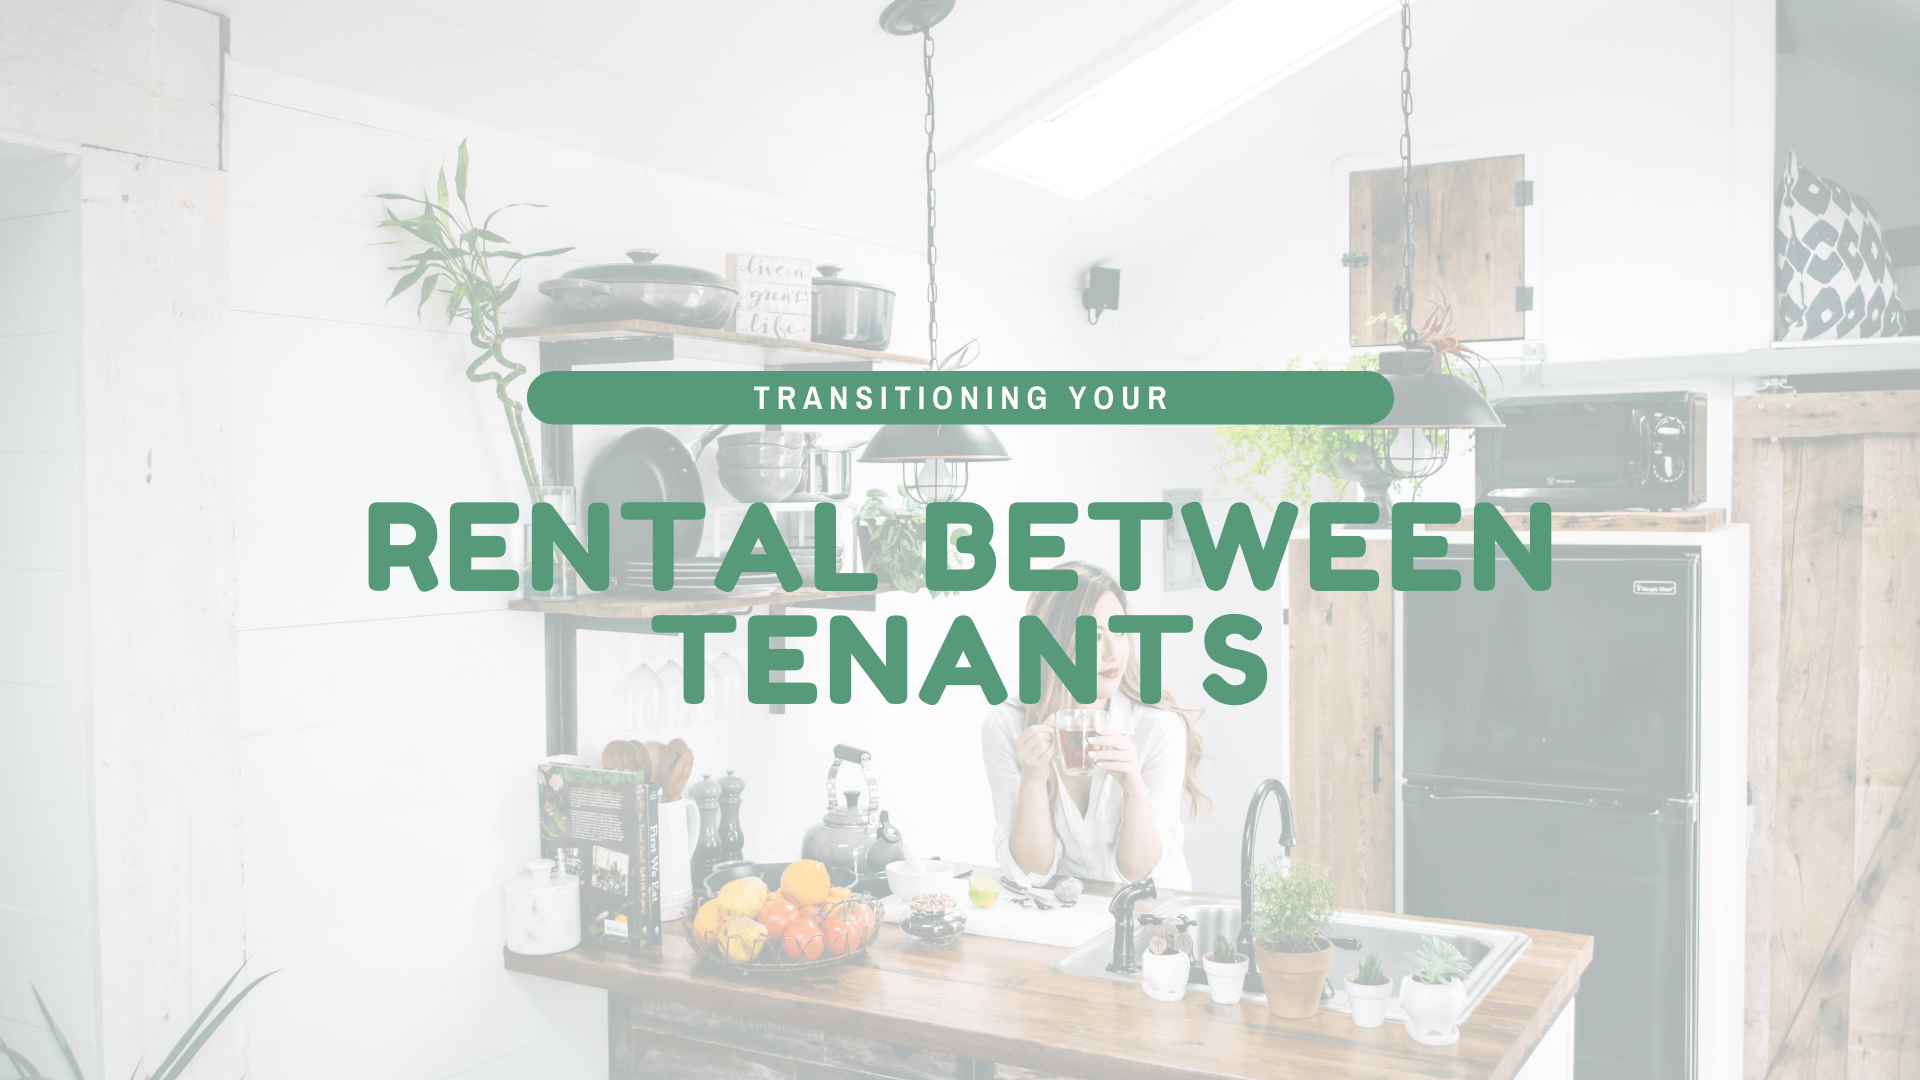 How to Transition Your San Francisco Rental Between Tenants - article banner